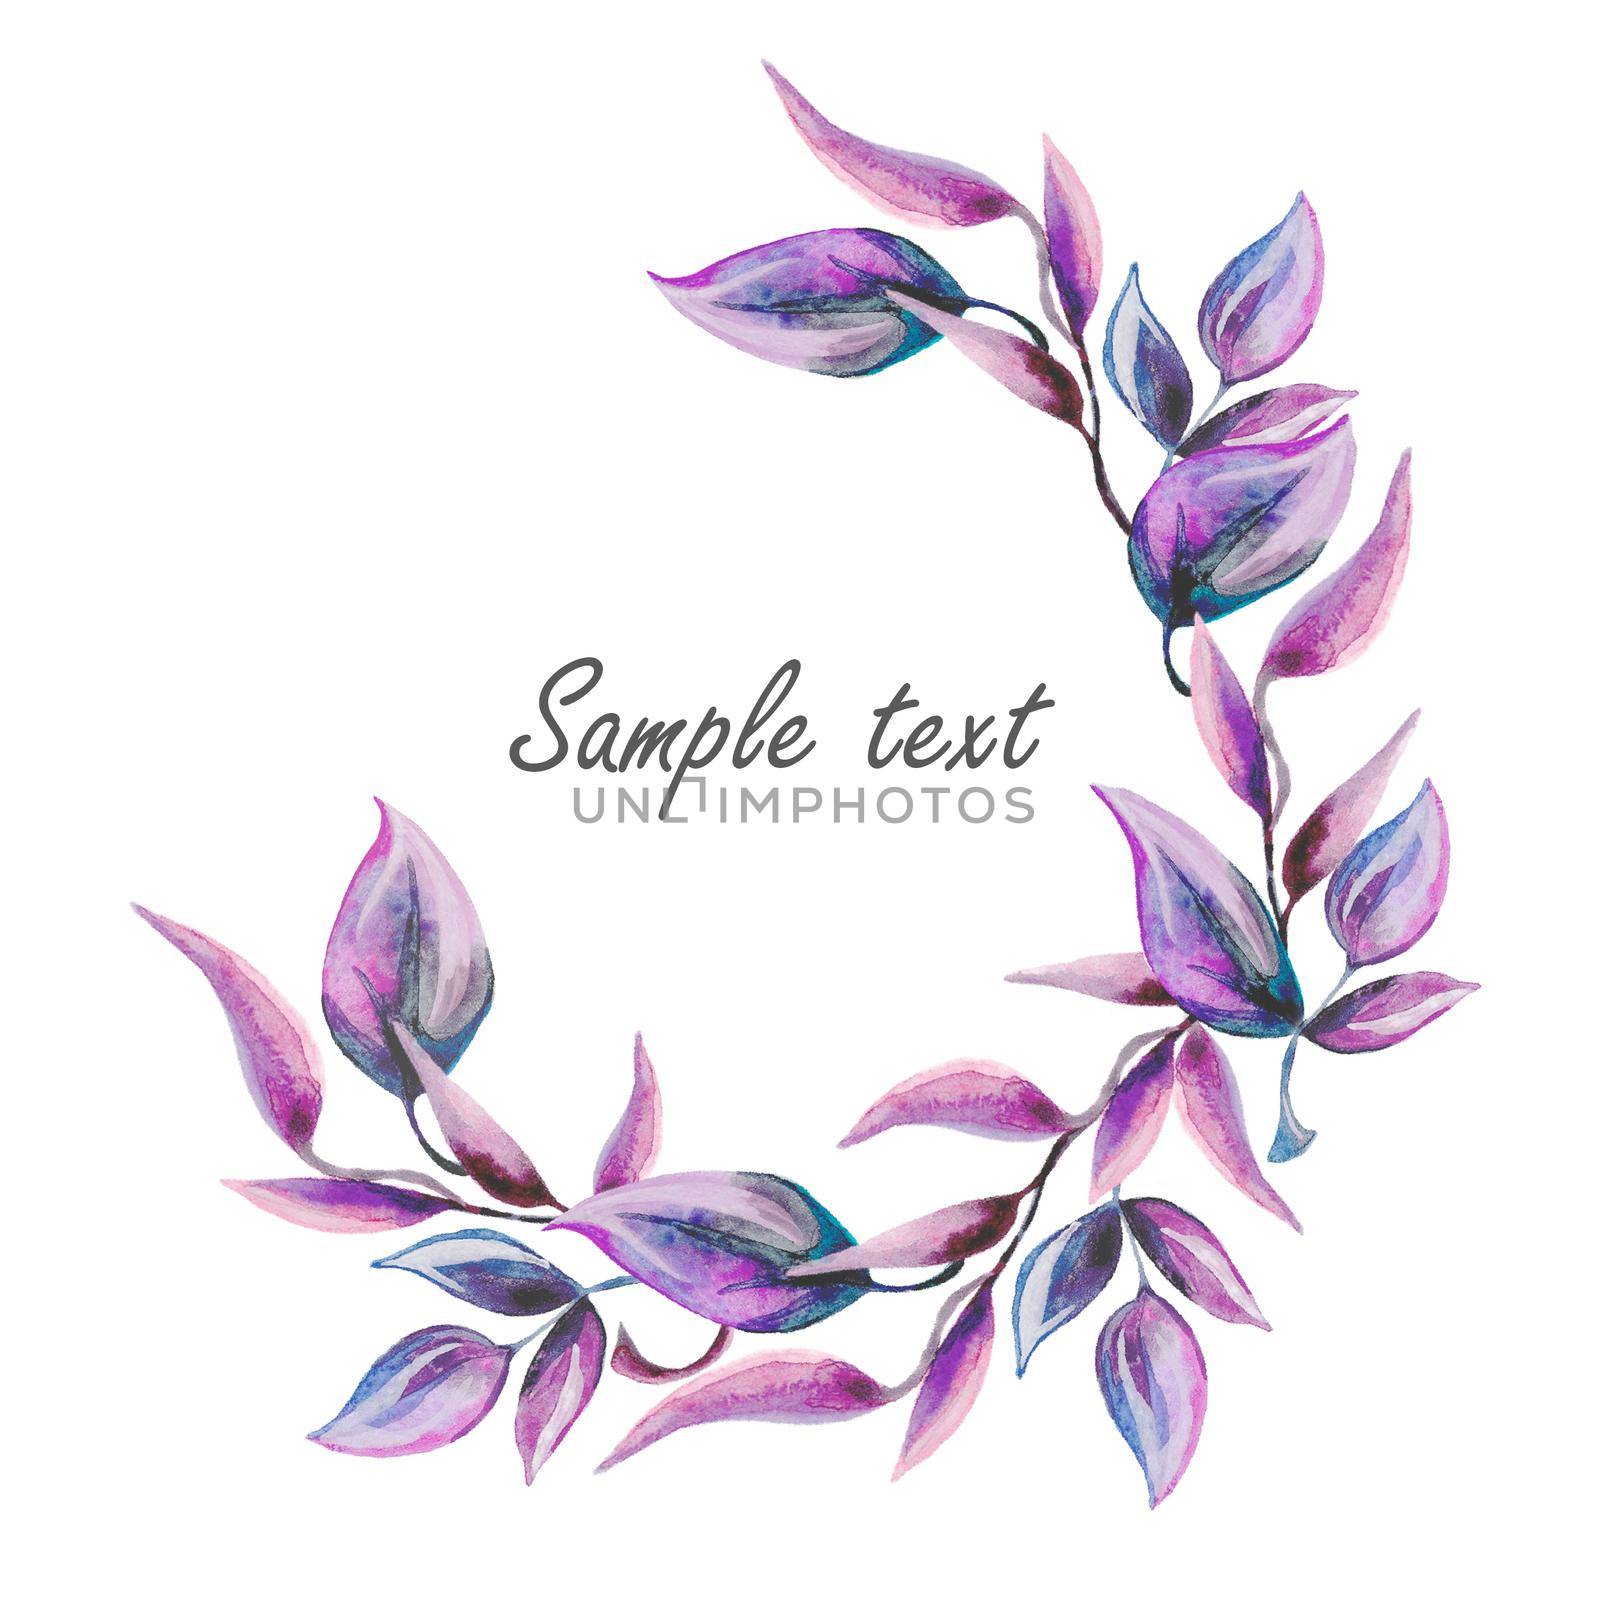 Frame round template with violet leaves and place for text. Watercolor illustration by fireFLYart